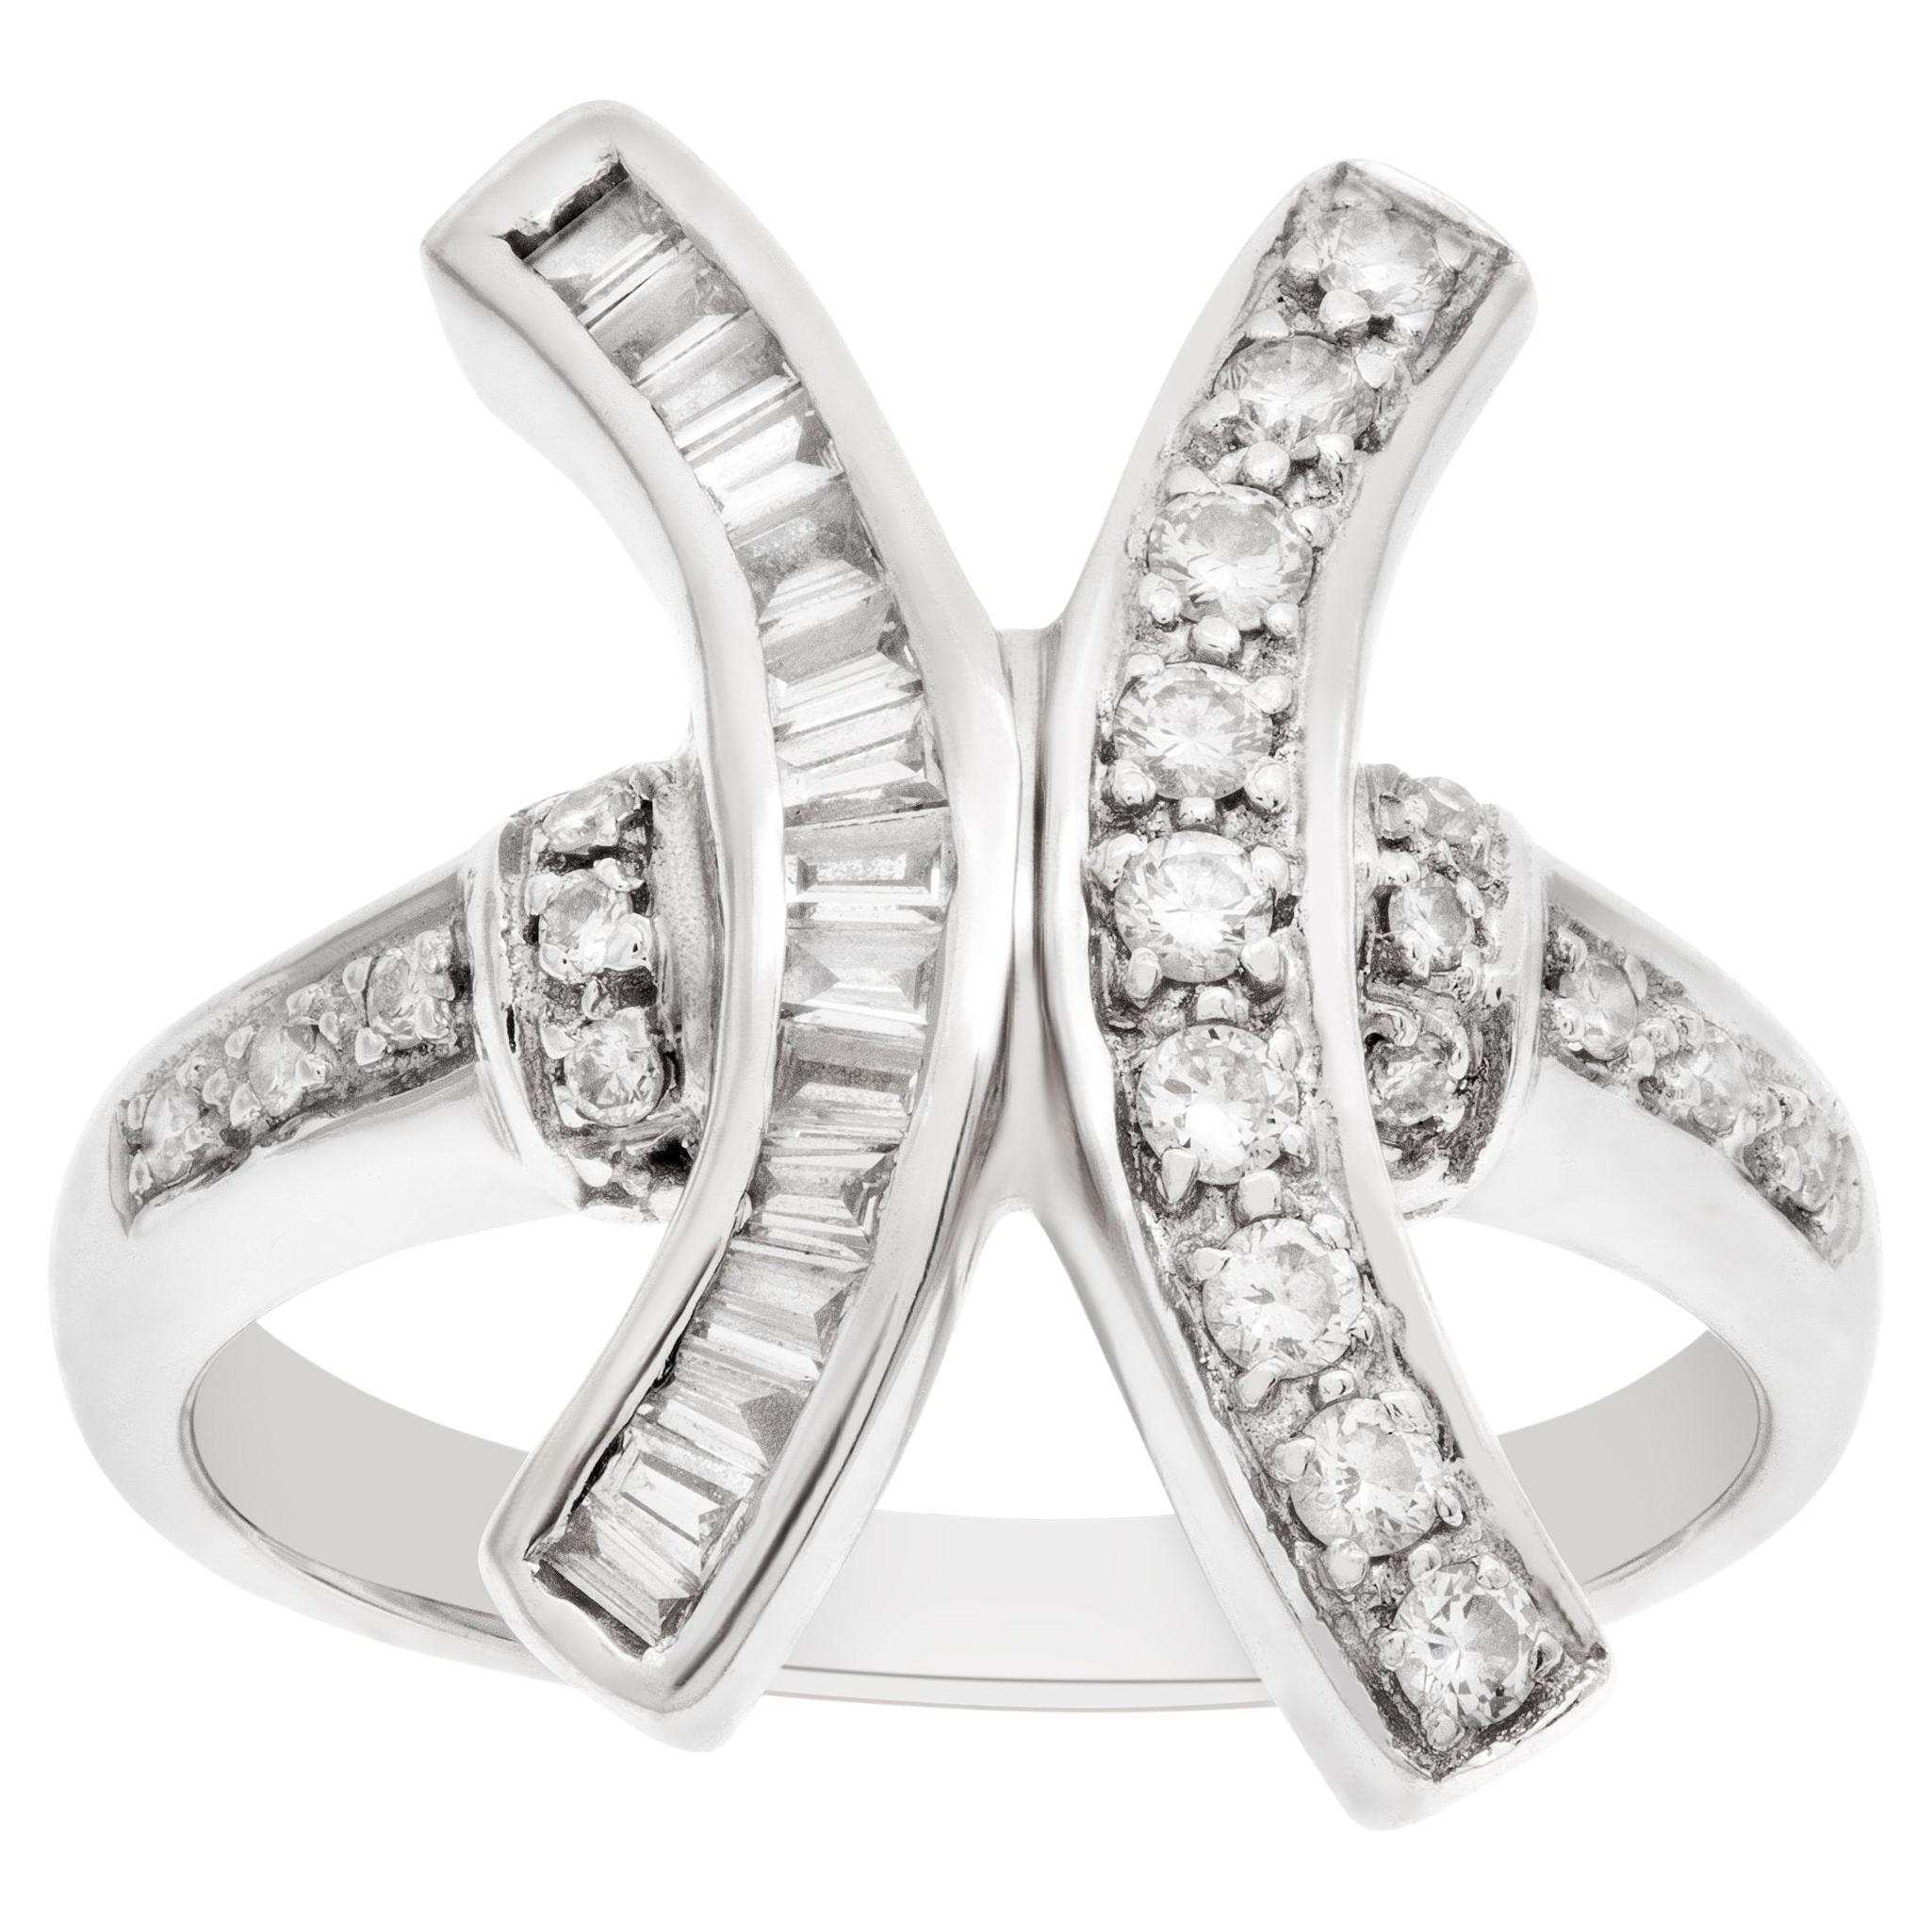 "X" Shaped Diamond Ring in 18k White Gold. 0.30 Carats in Diamonds For Sale